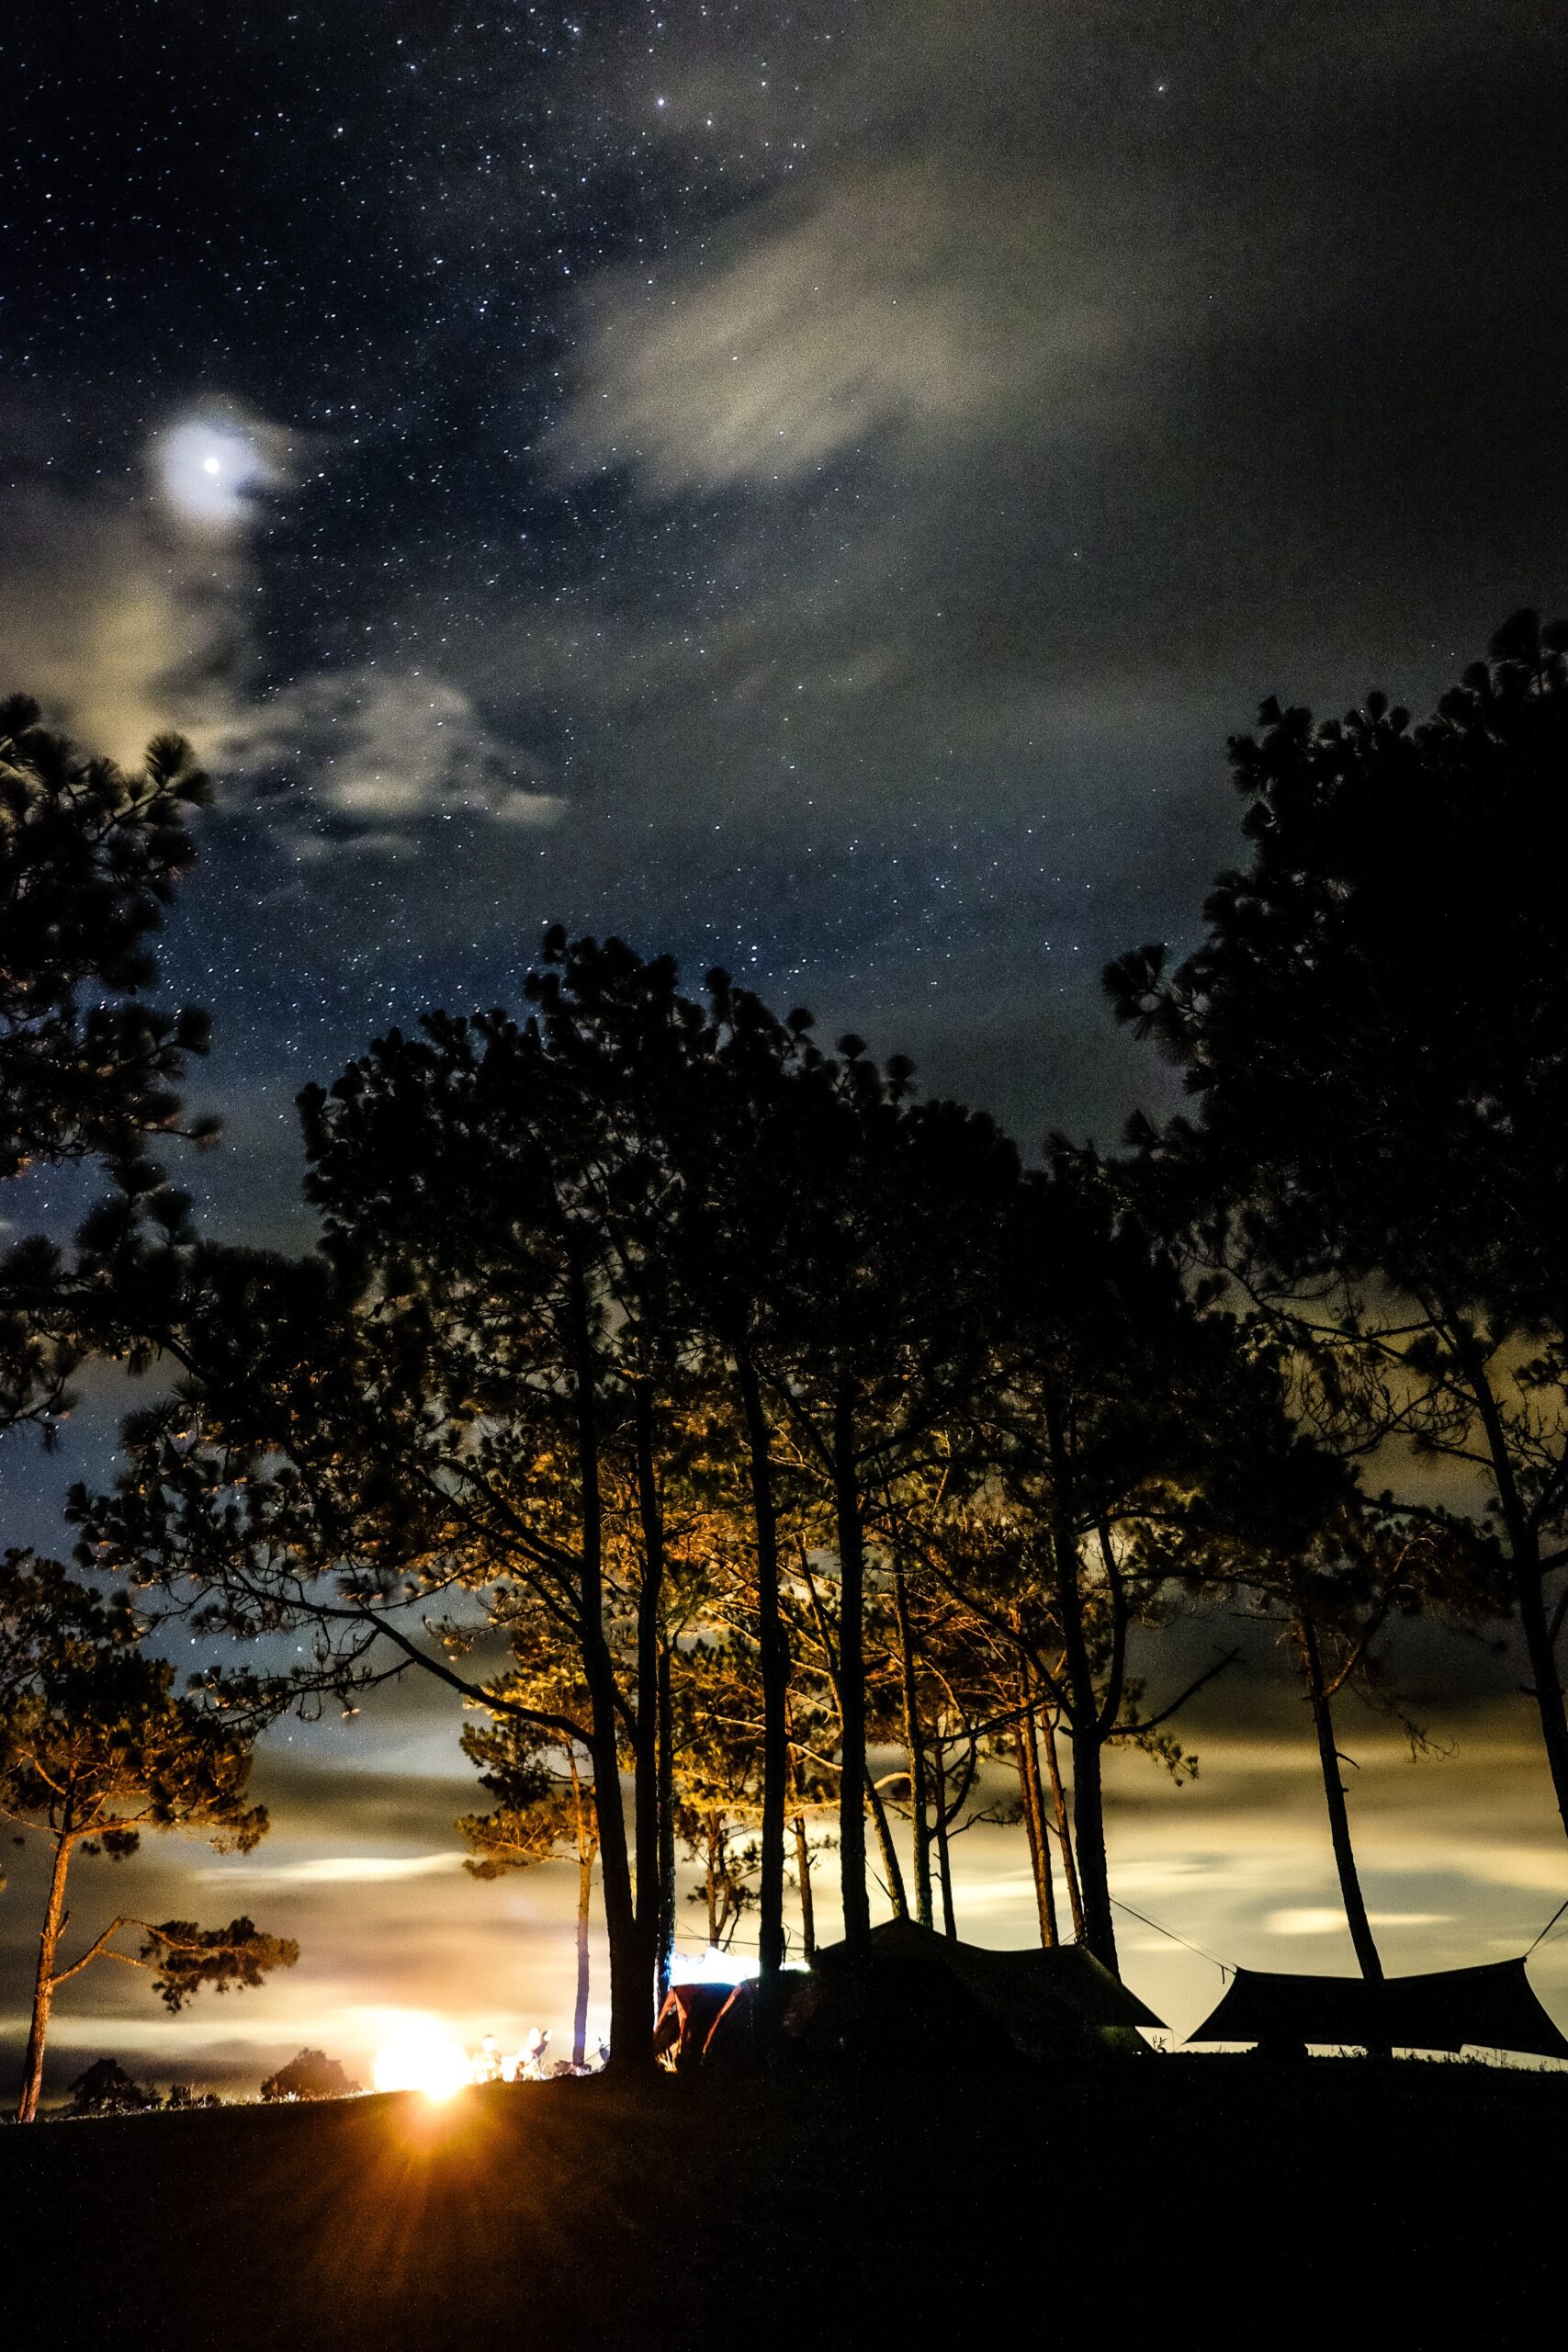 A campsite among a starry night sky with a low setting sun glowing behind trees